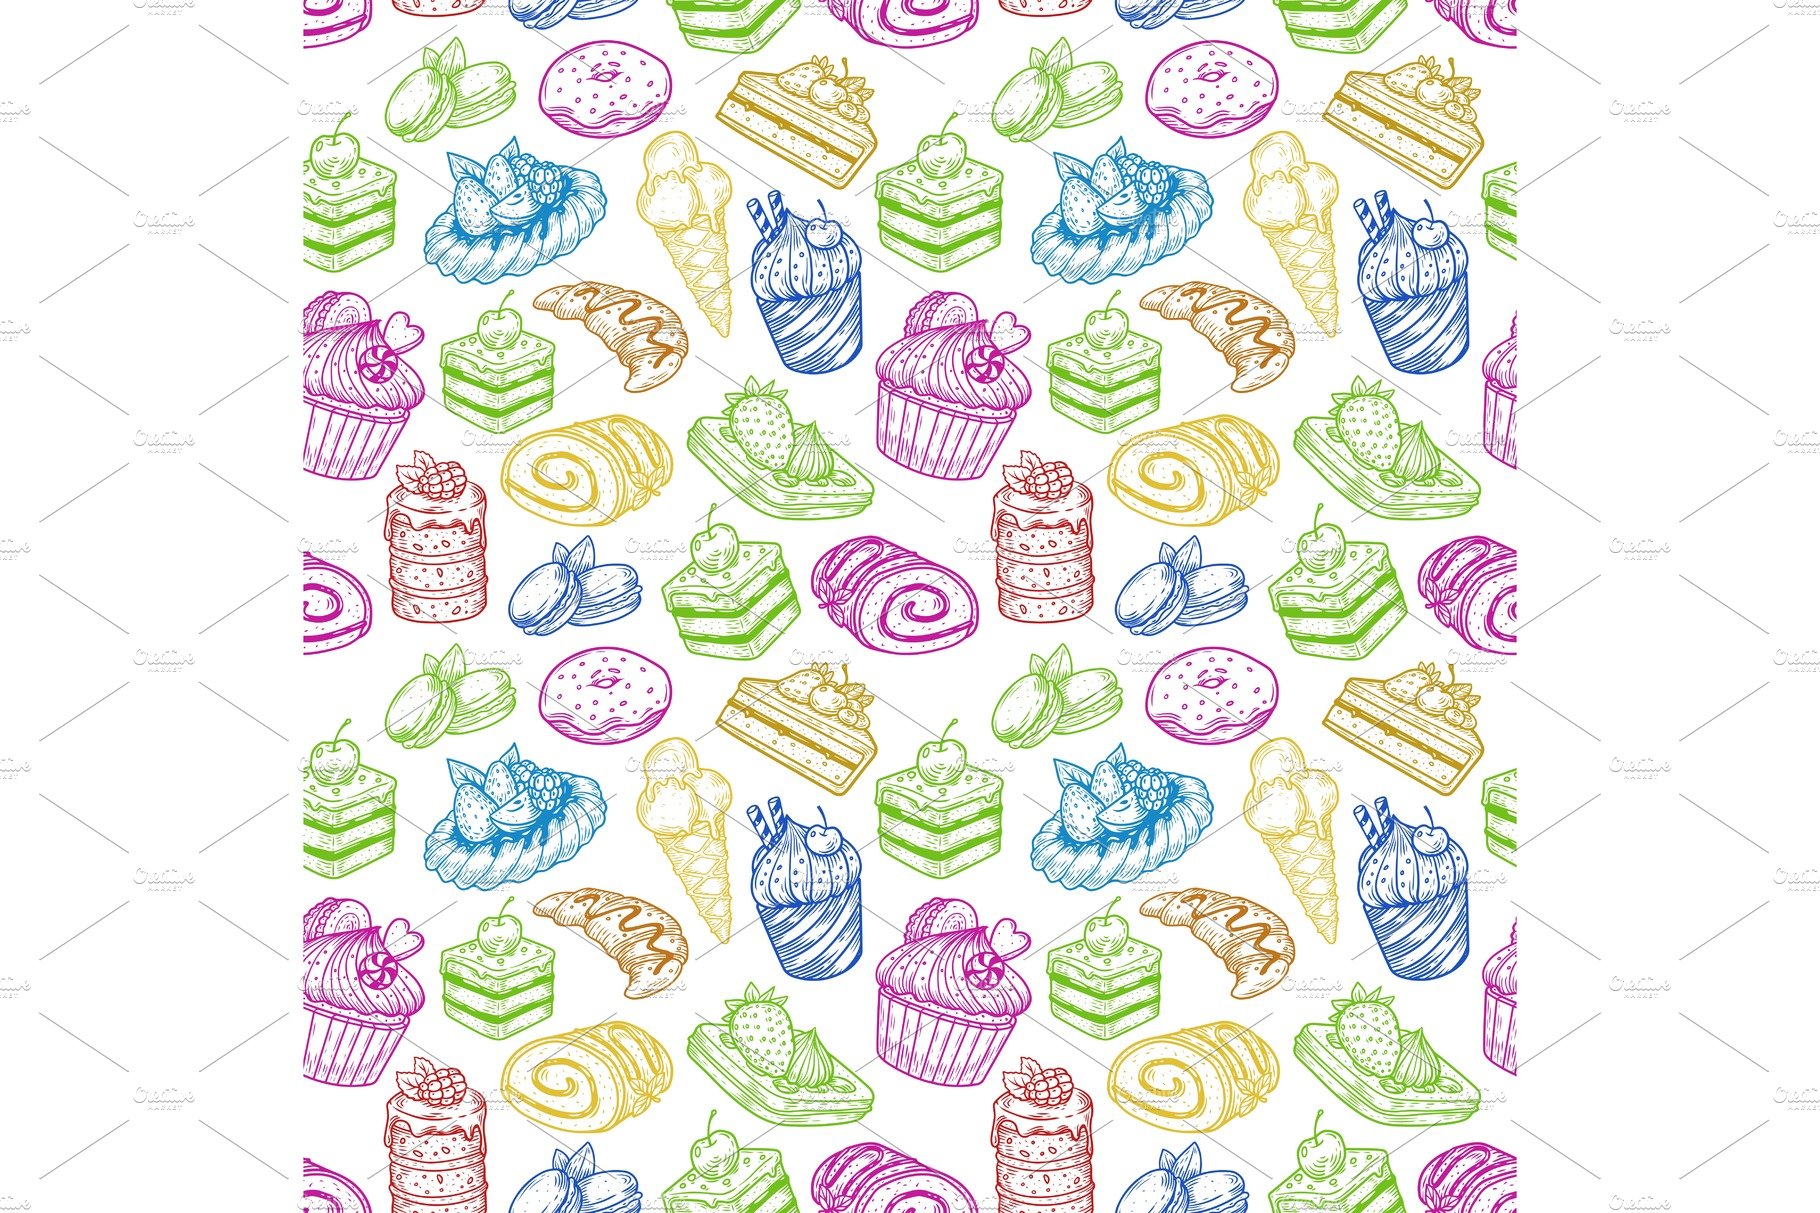 Seamless pattern made of pastry or cover image.